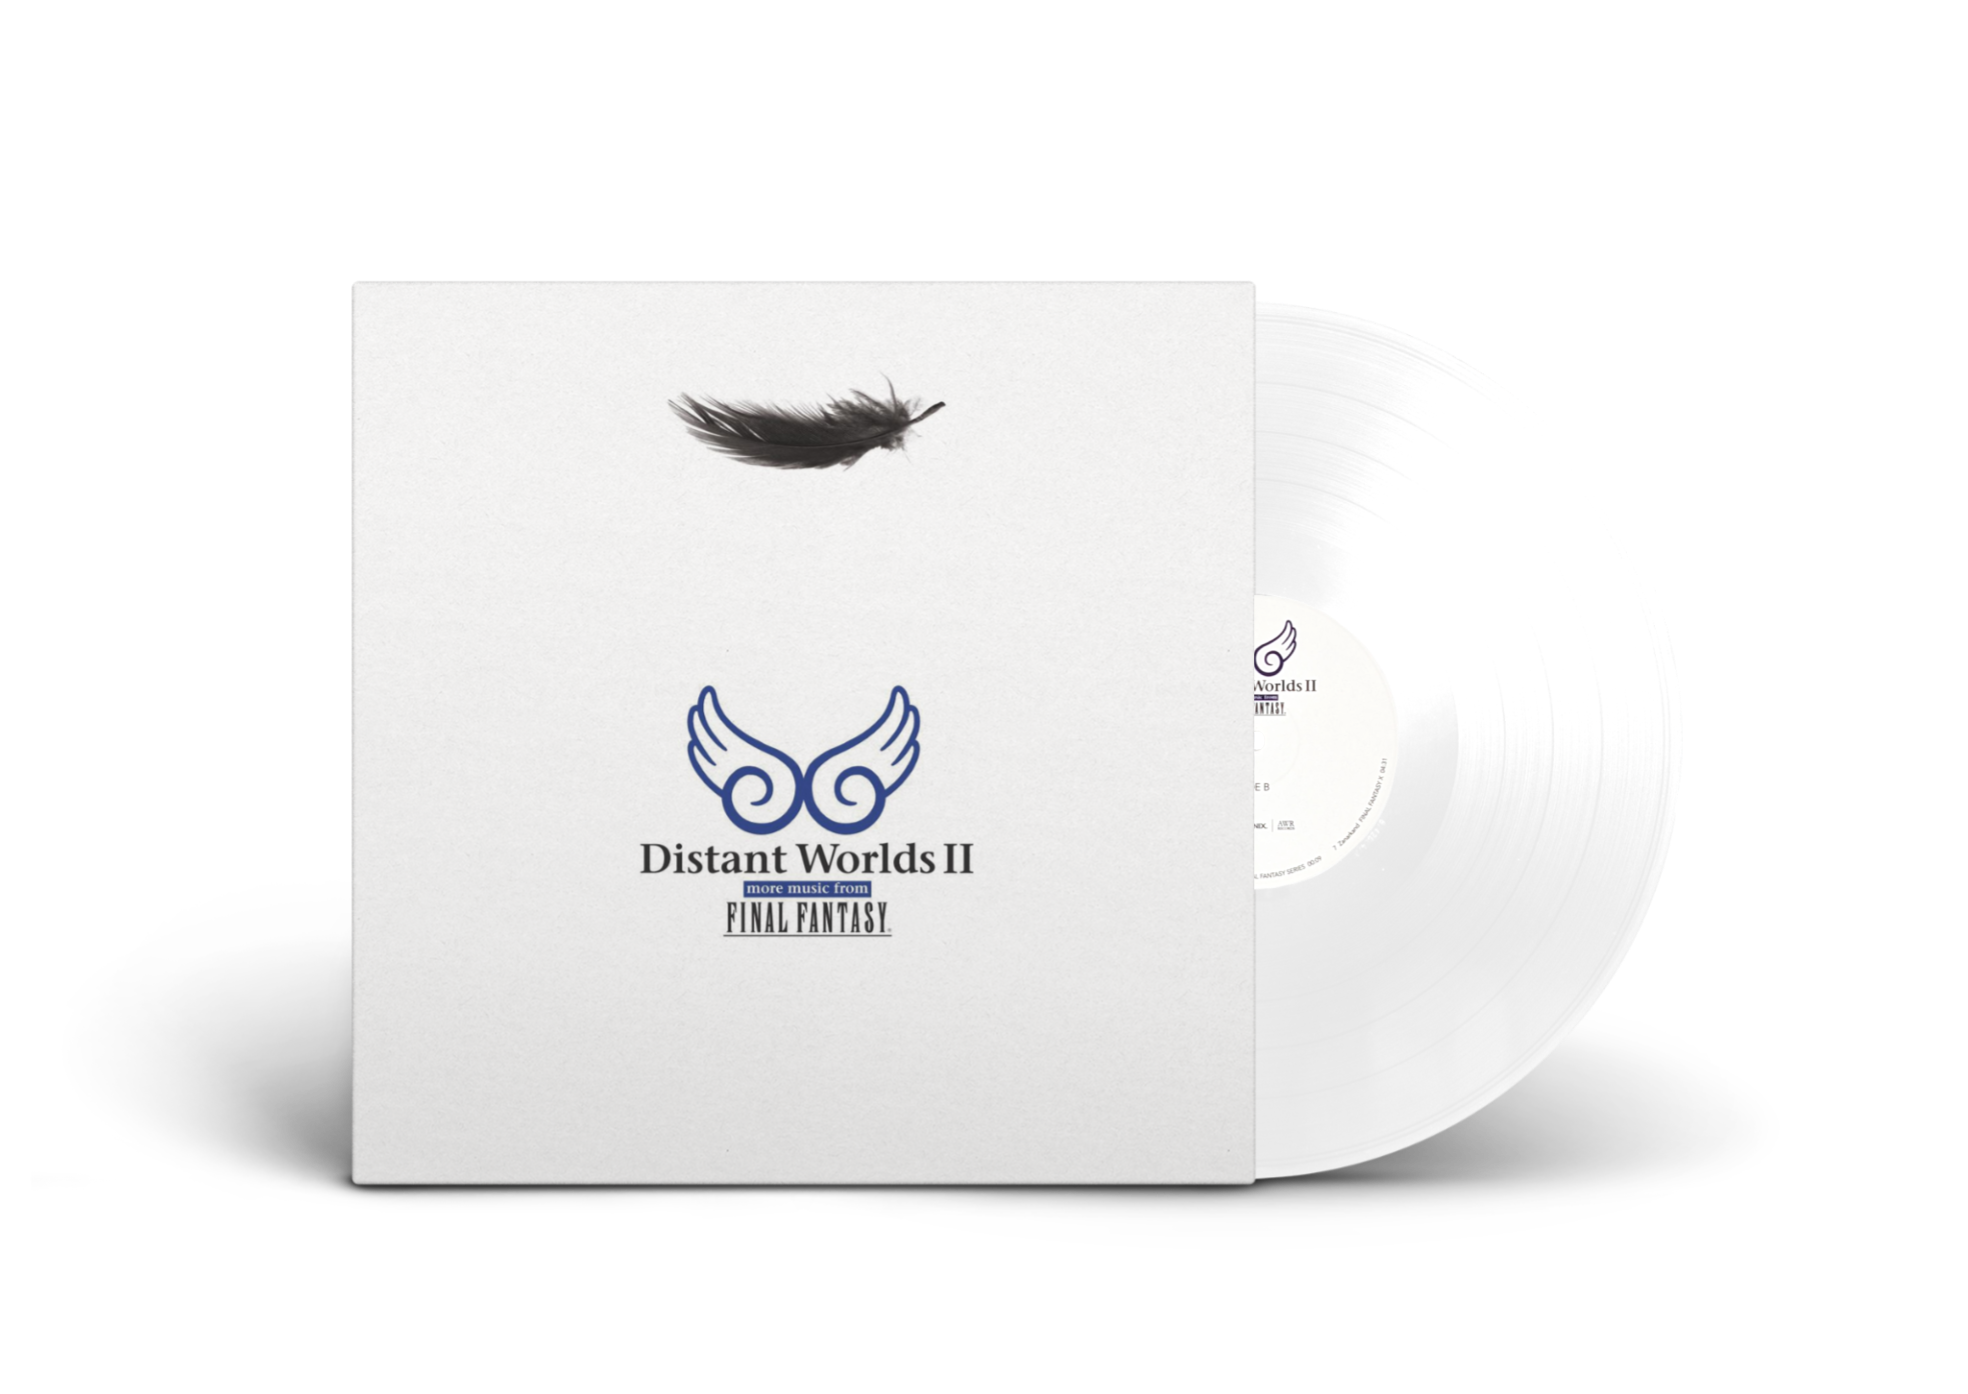 Distant Worlds II: more music from FINAL FANTASY vinyl LP 